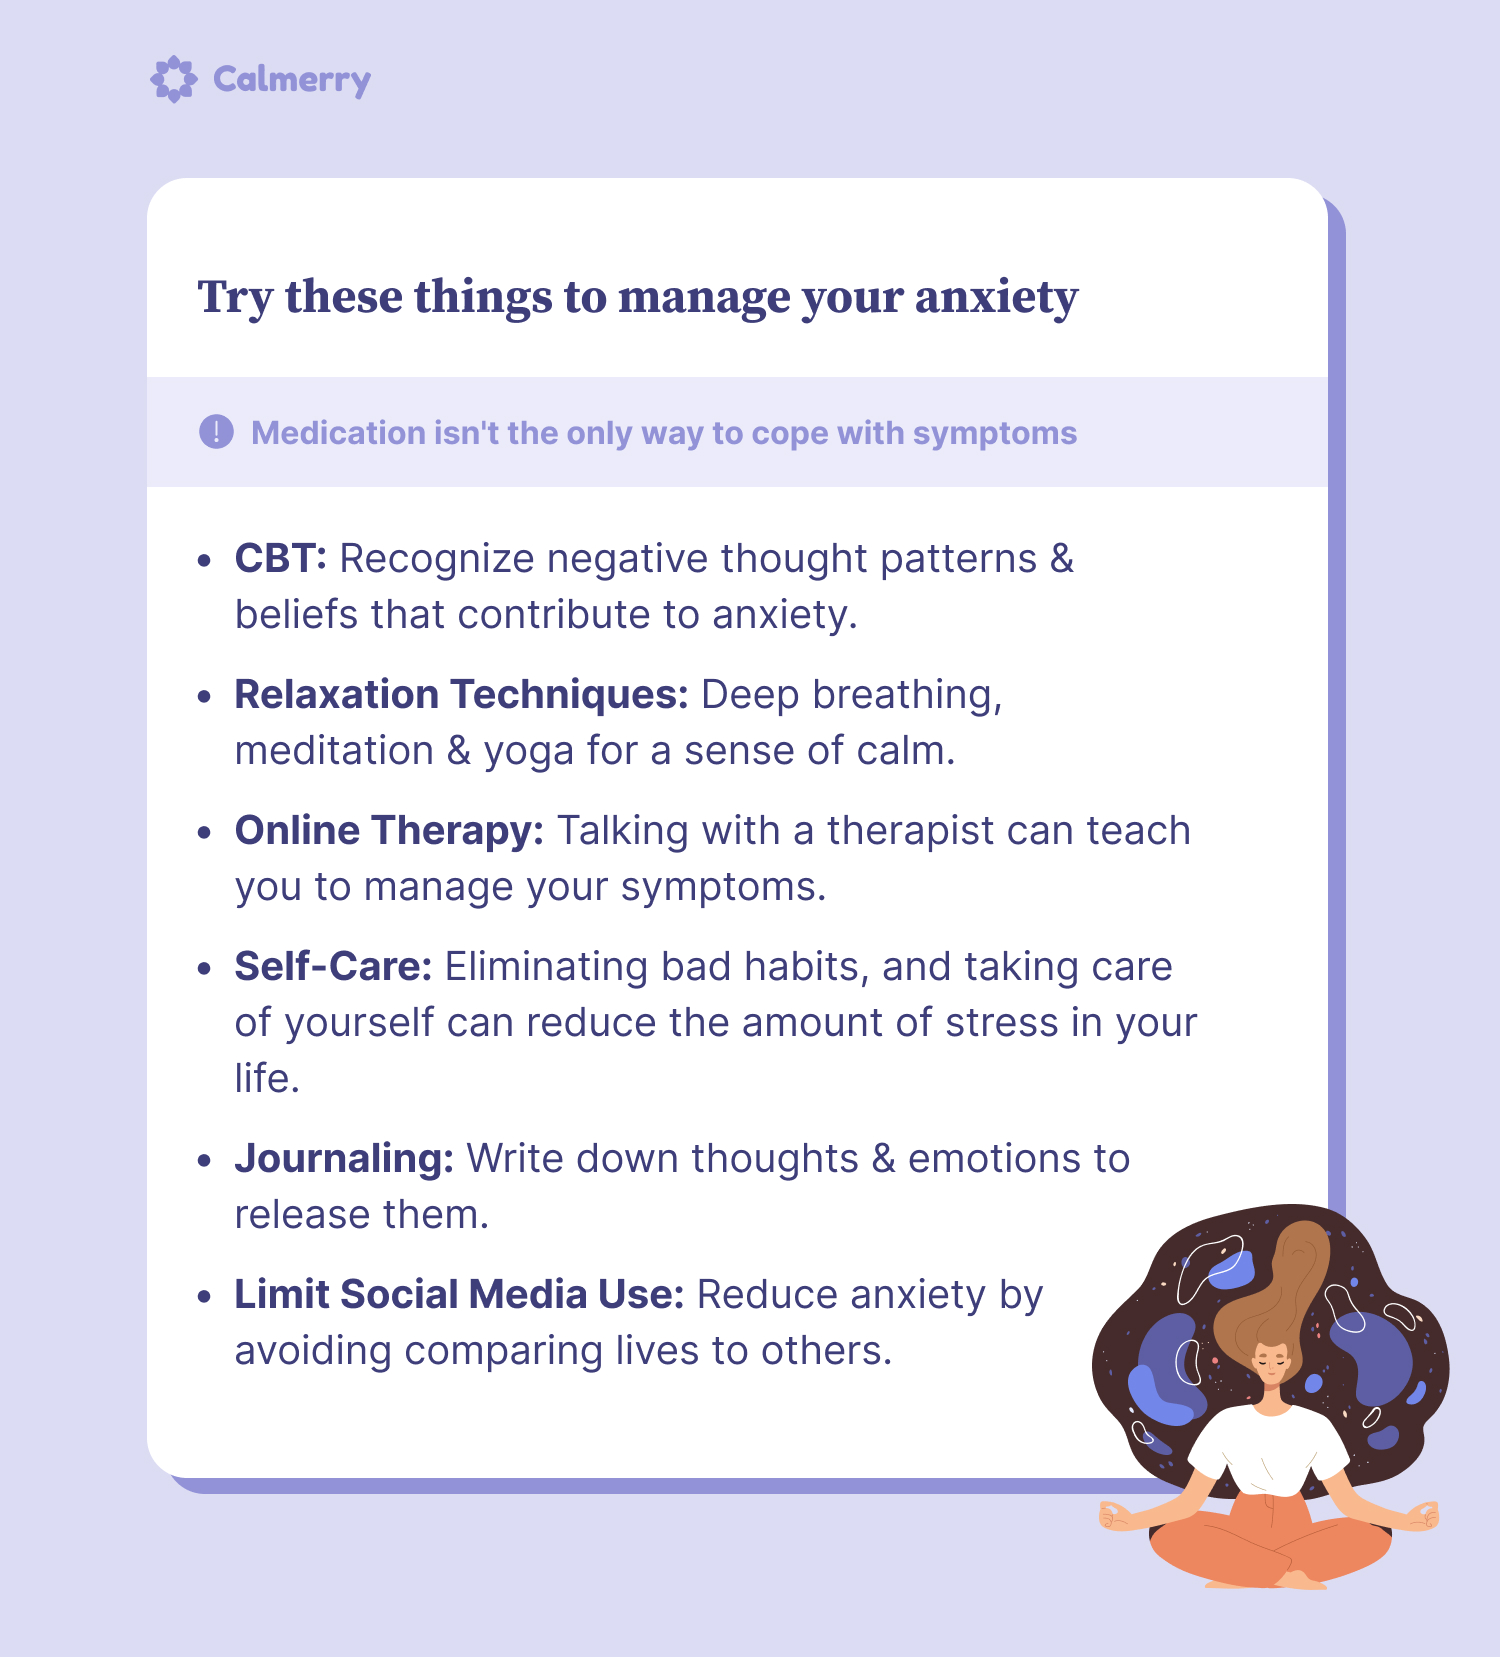 Try these things to manage your anxiety